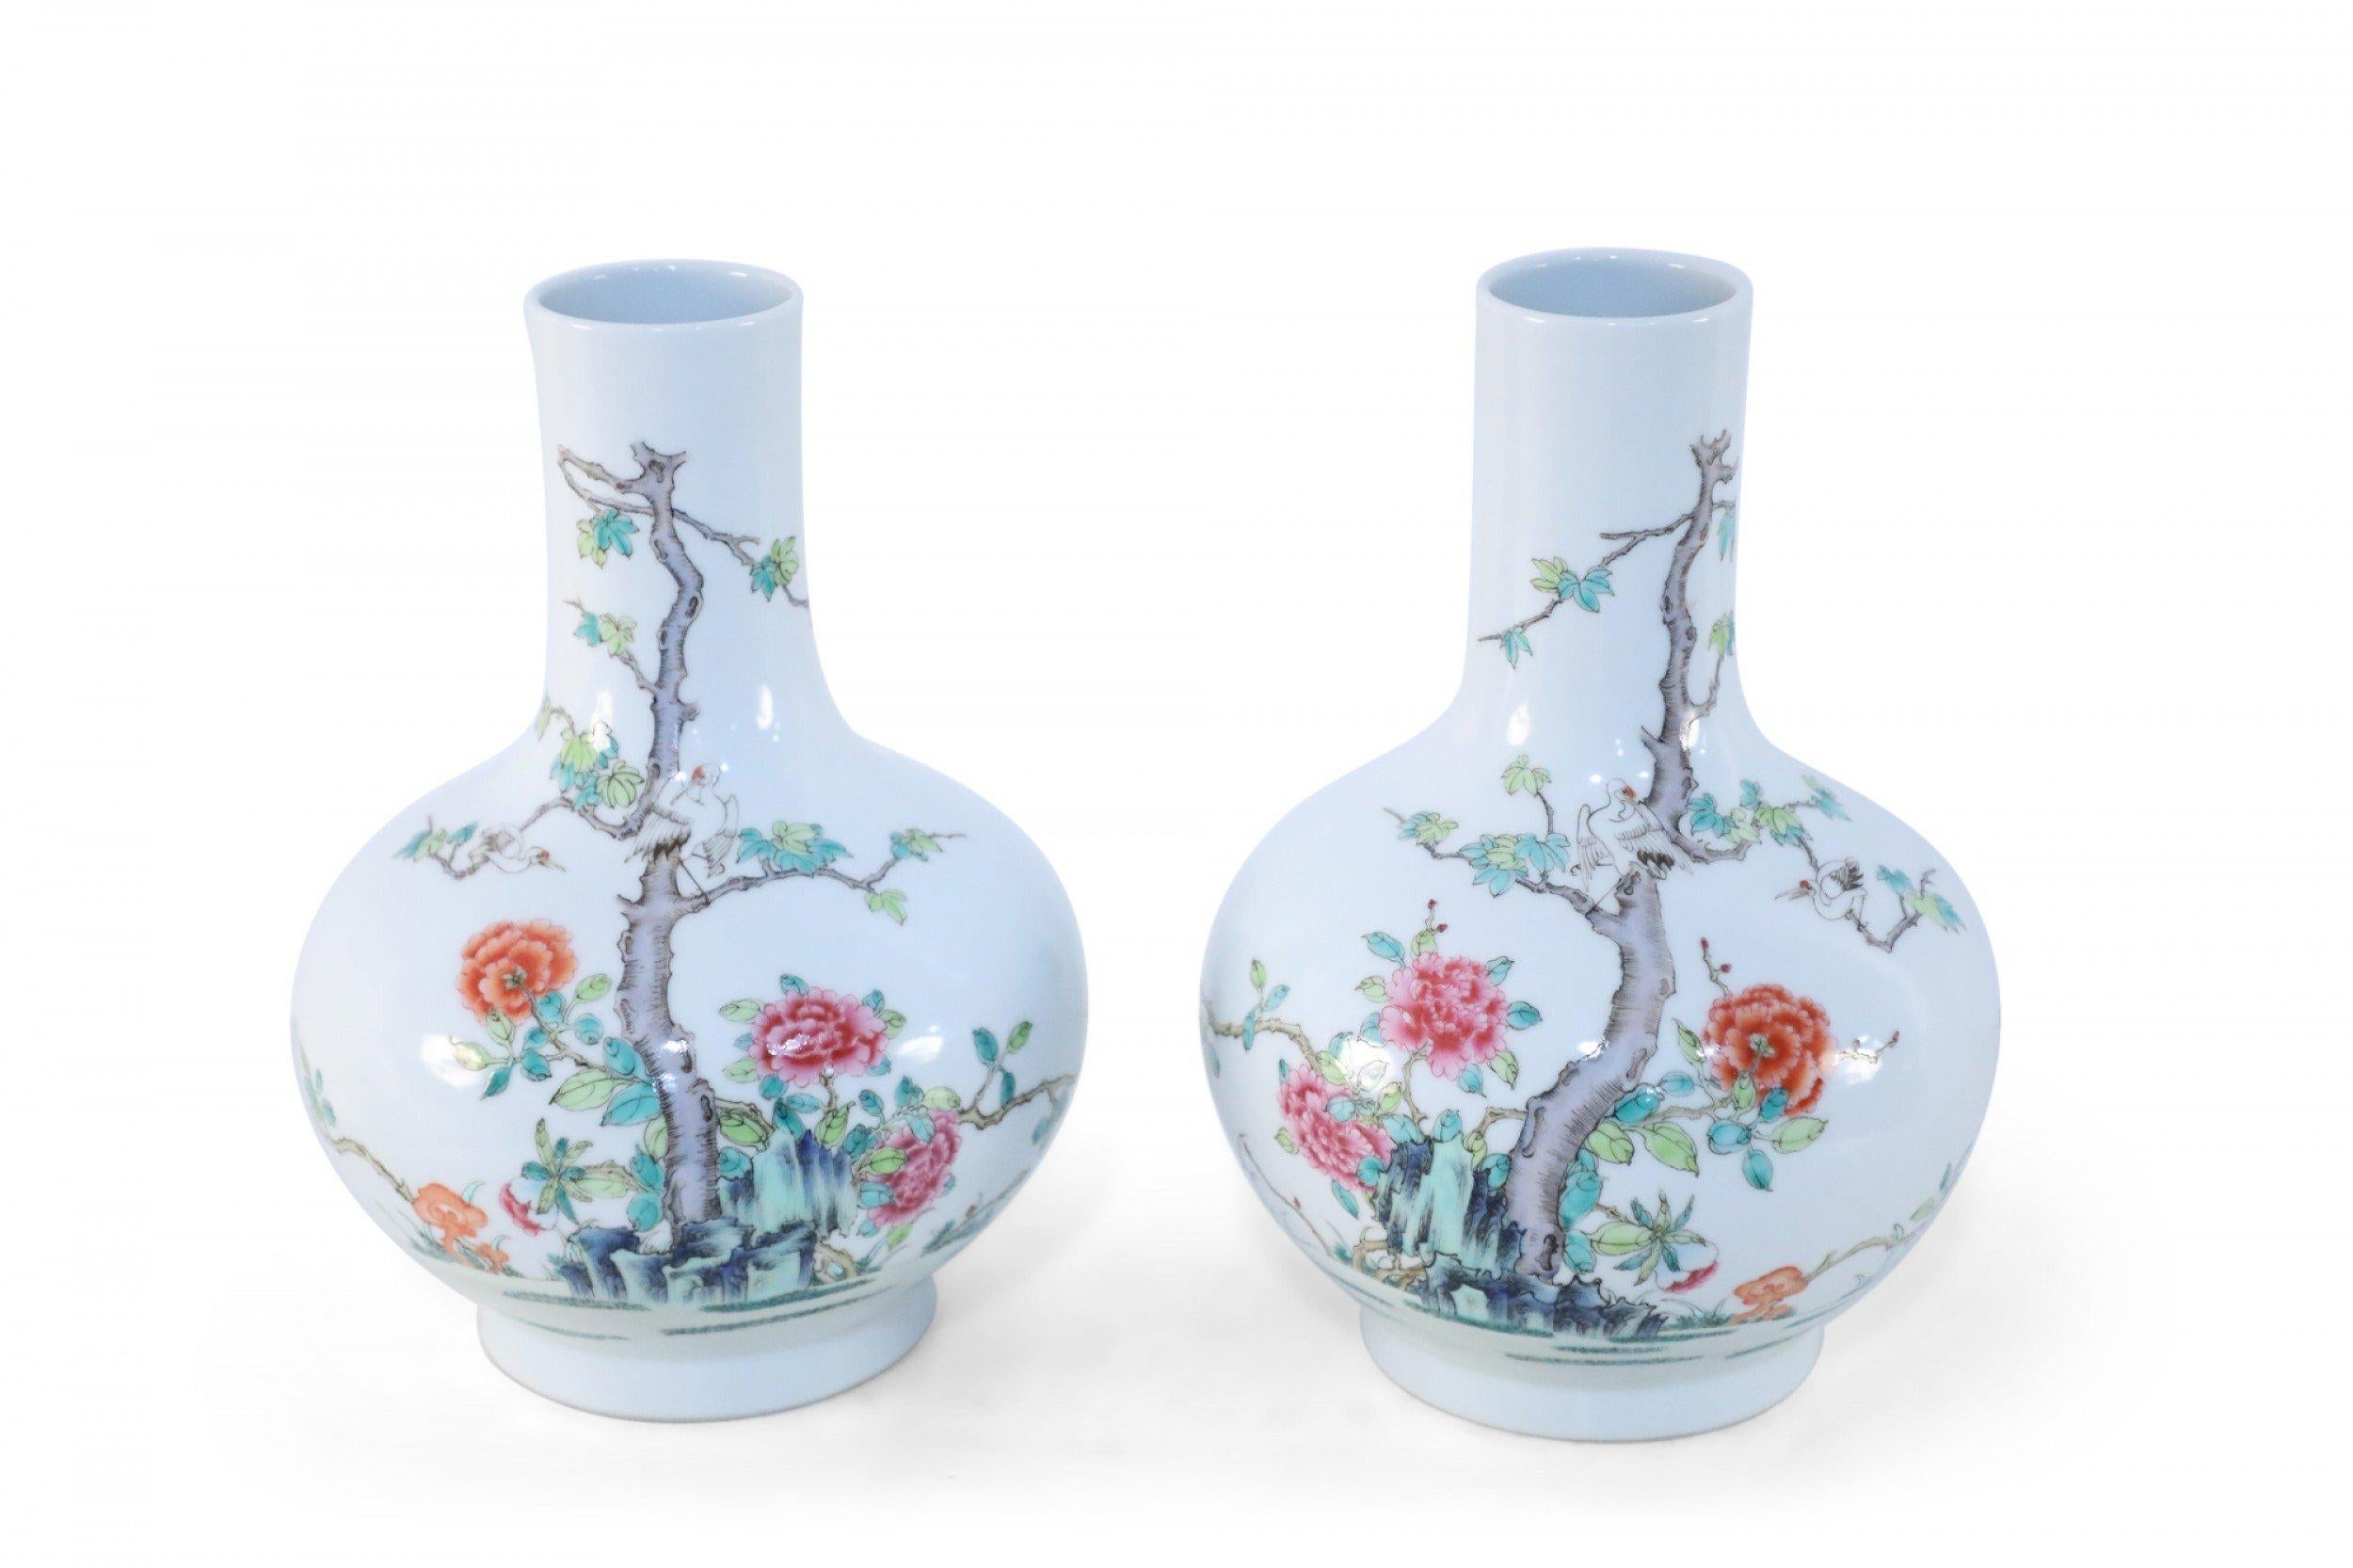 Pair of antique Chinese (late 19th century) famille rose globular porcelain vases decorated with cranes amid a tree growing from grasses surrounded by blooming pink and orange flowers on one side, and characters on the reverse (date mark on bottom,